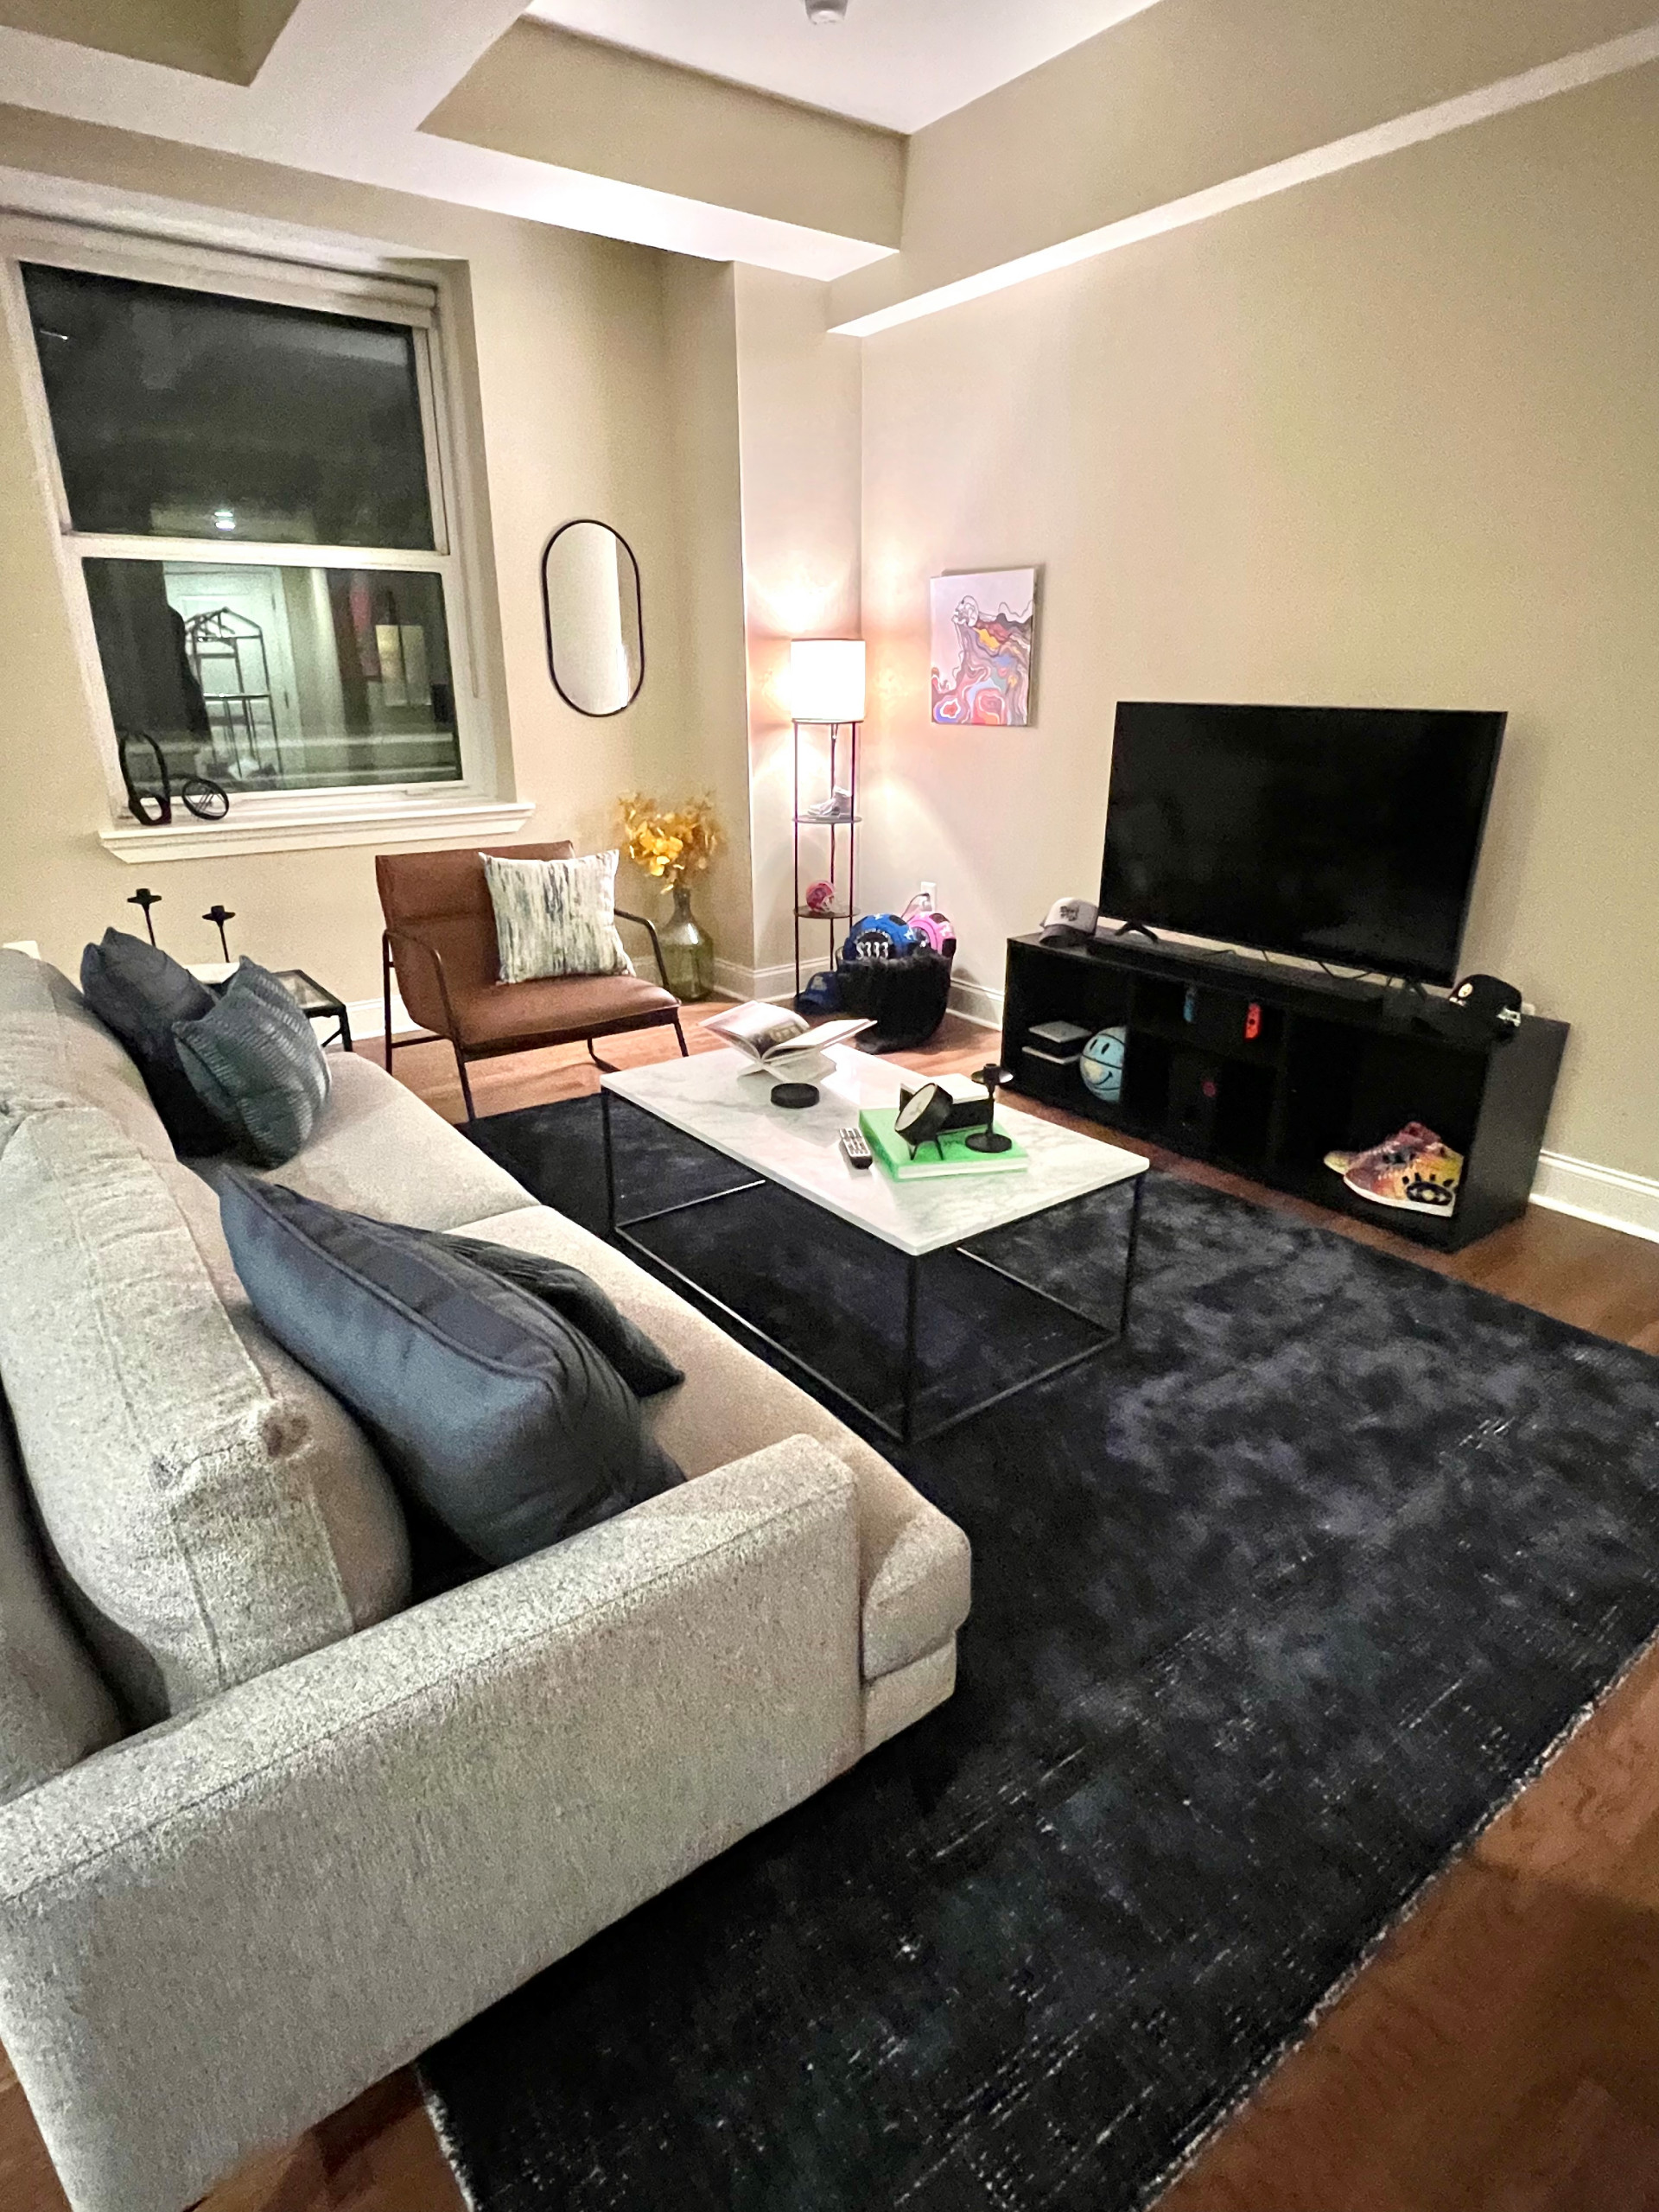 Sometimes you move into an apartment or home and just don't know where to begin.  FUNCY DECOR can help!  A young professional client needed layout options, purchase furniture, and decor to make it fit